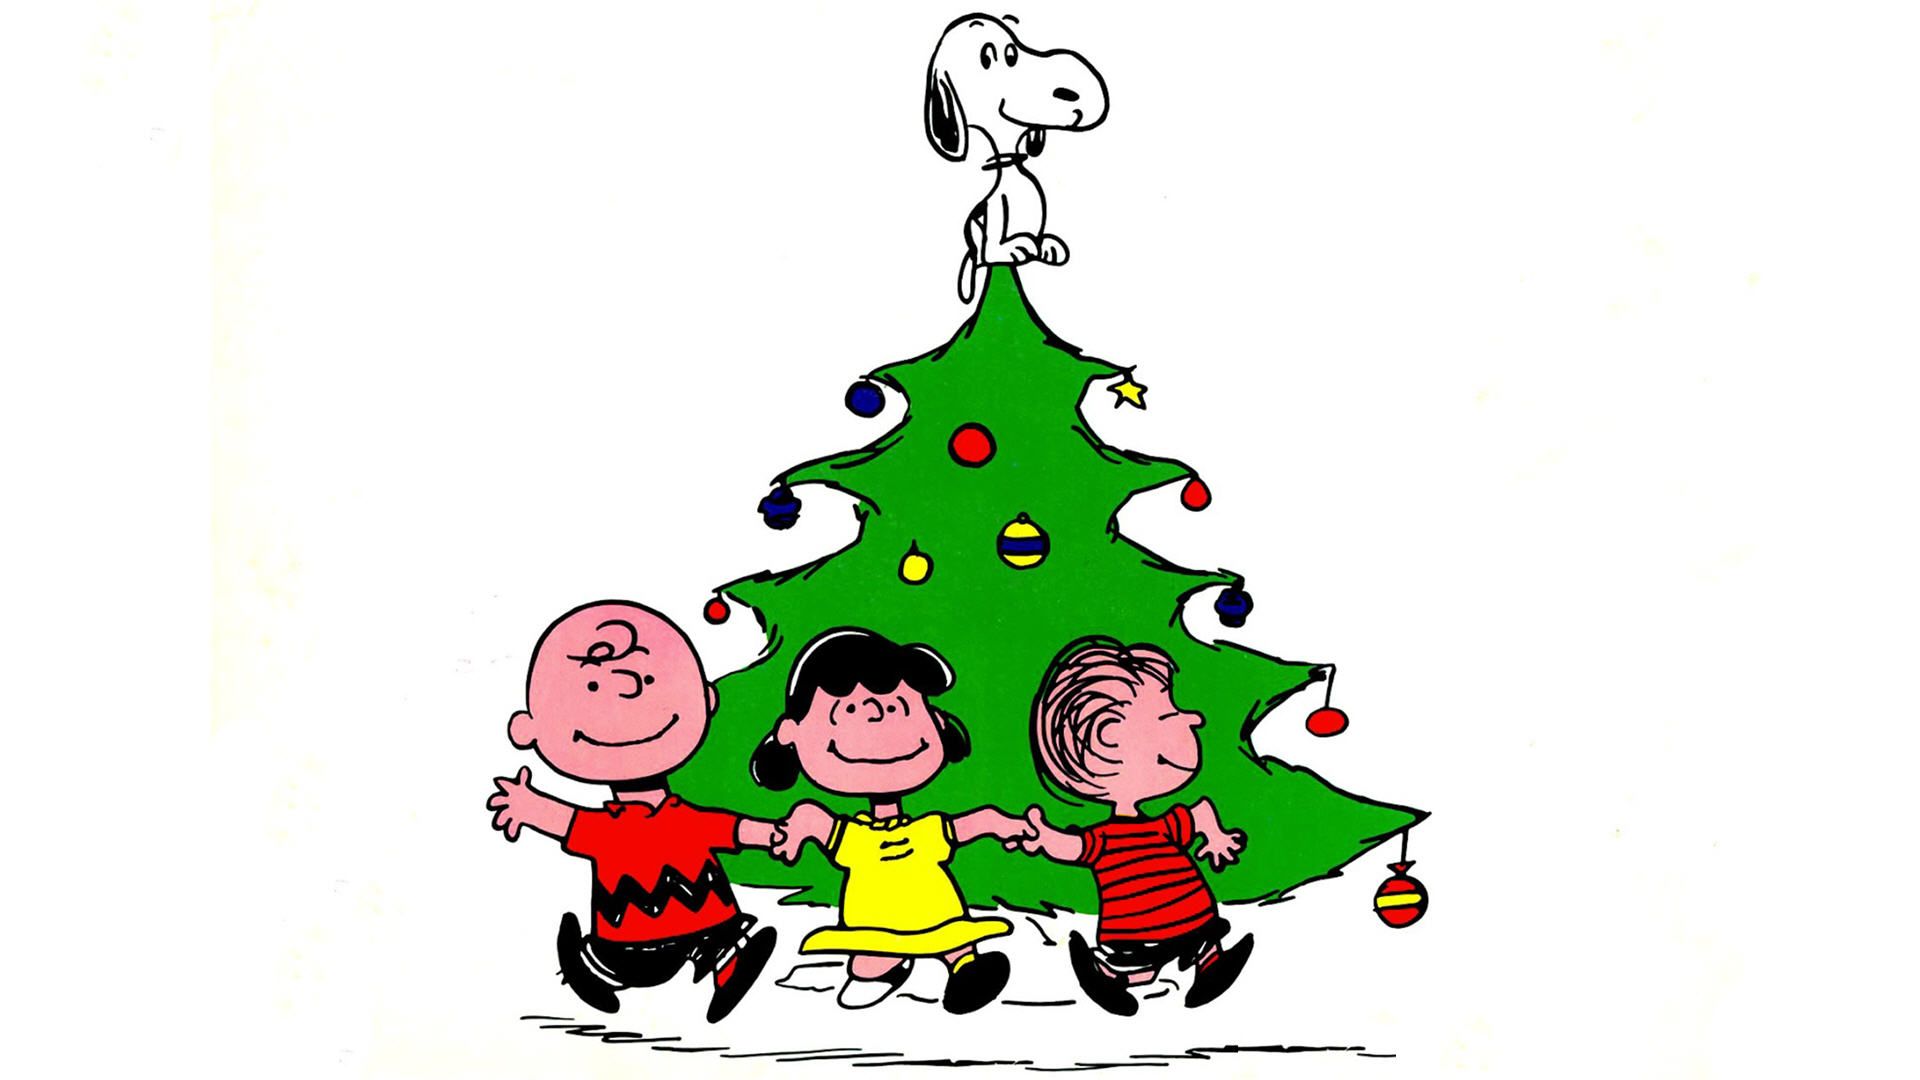 Charlie Brown Christmas tree dancing with friends and dog. - Charlie Brown